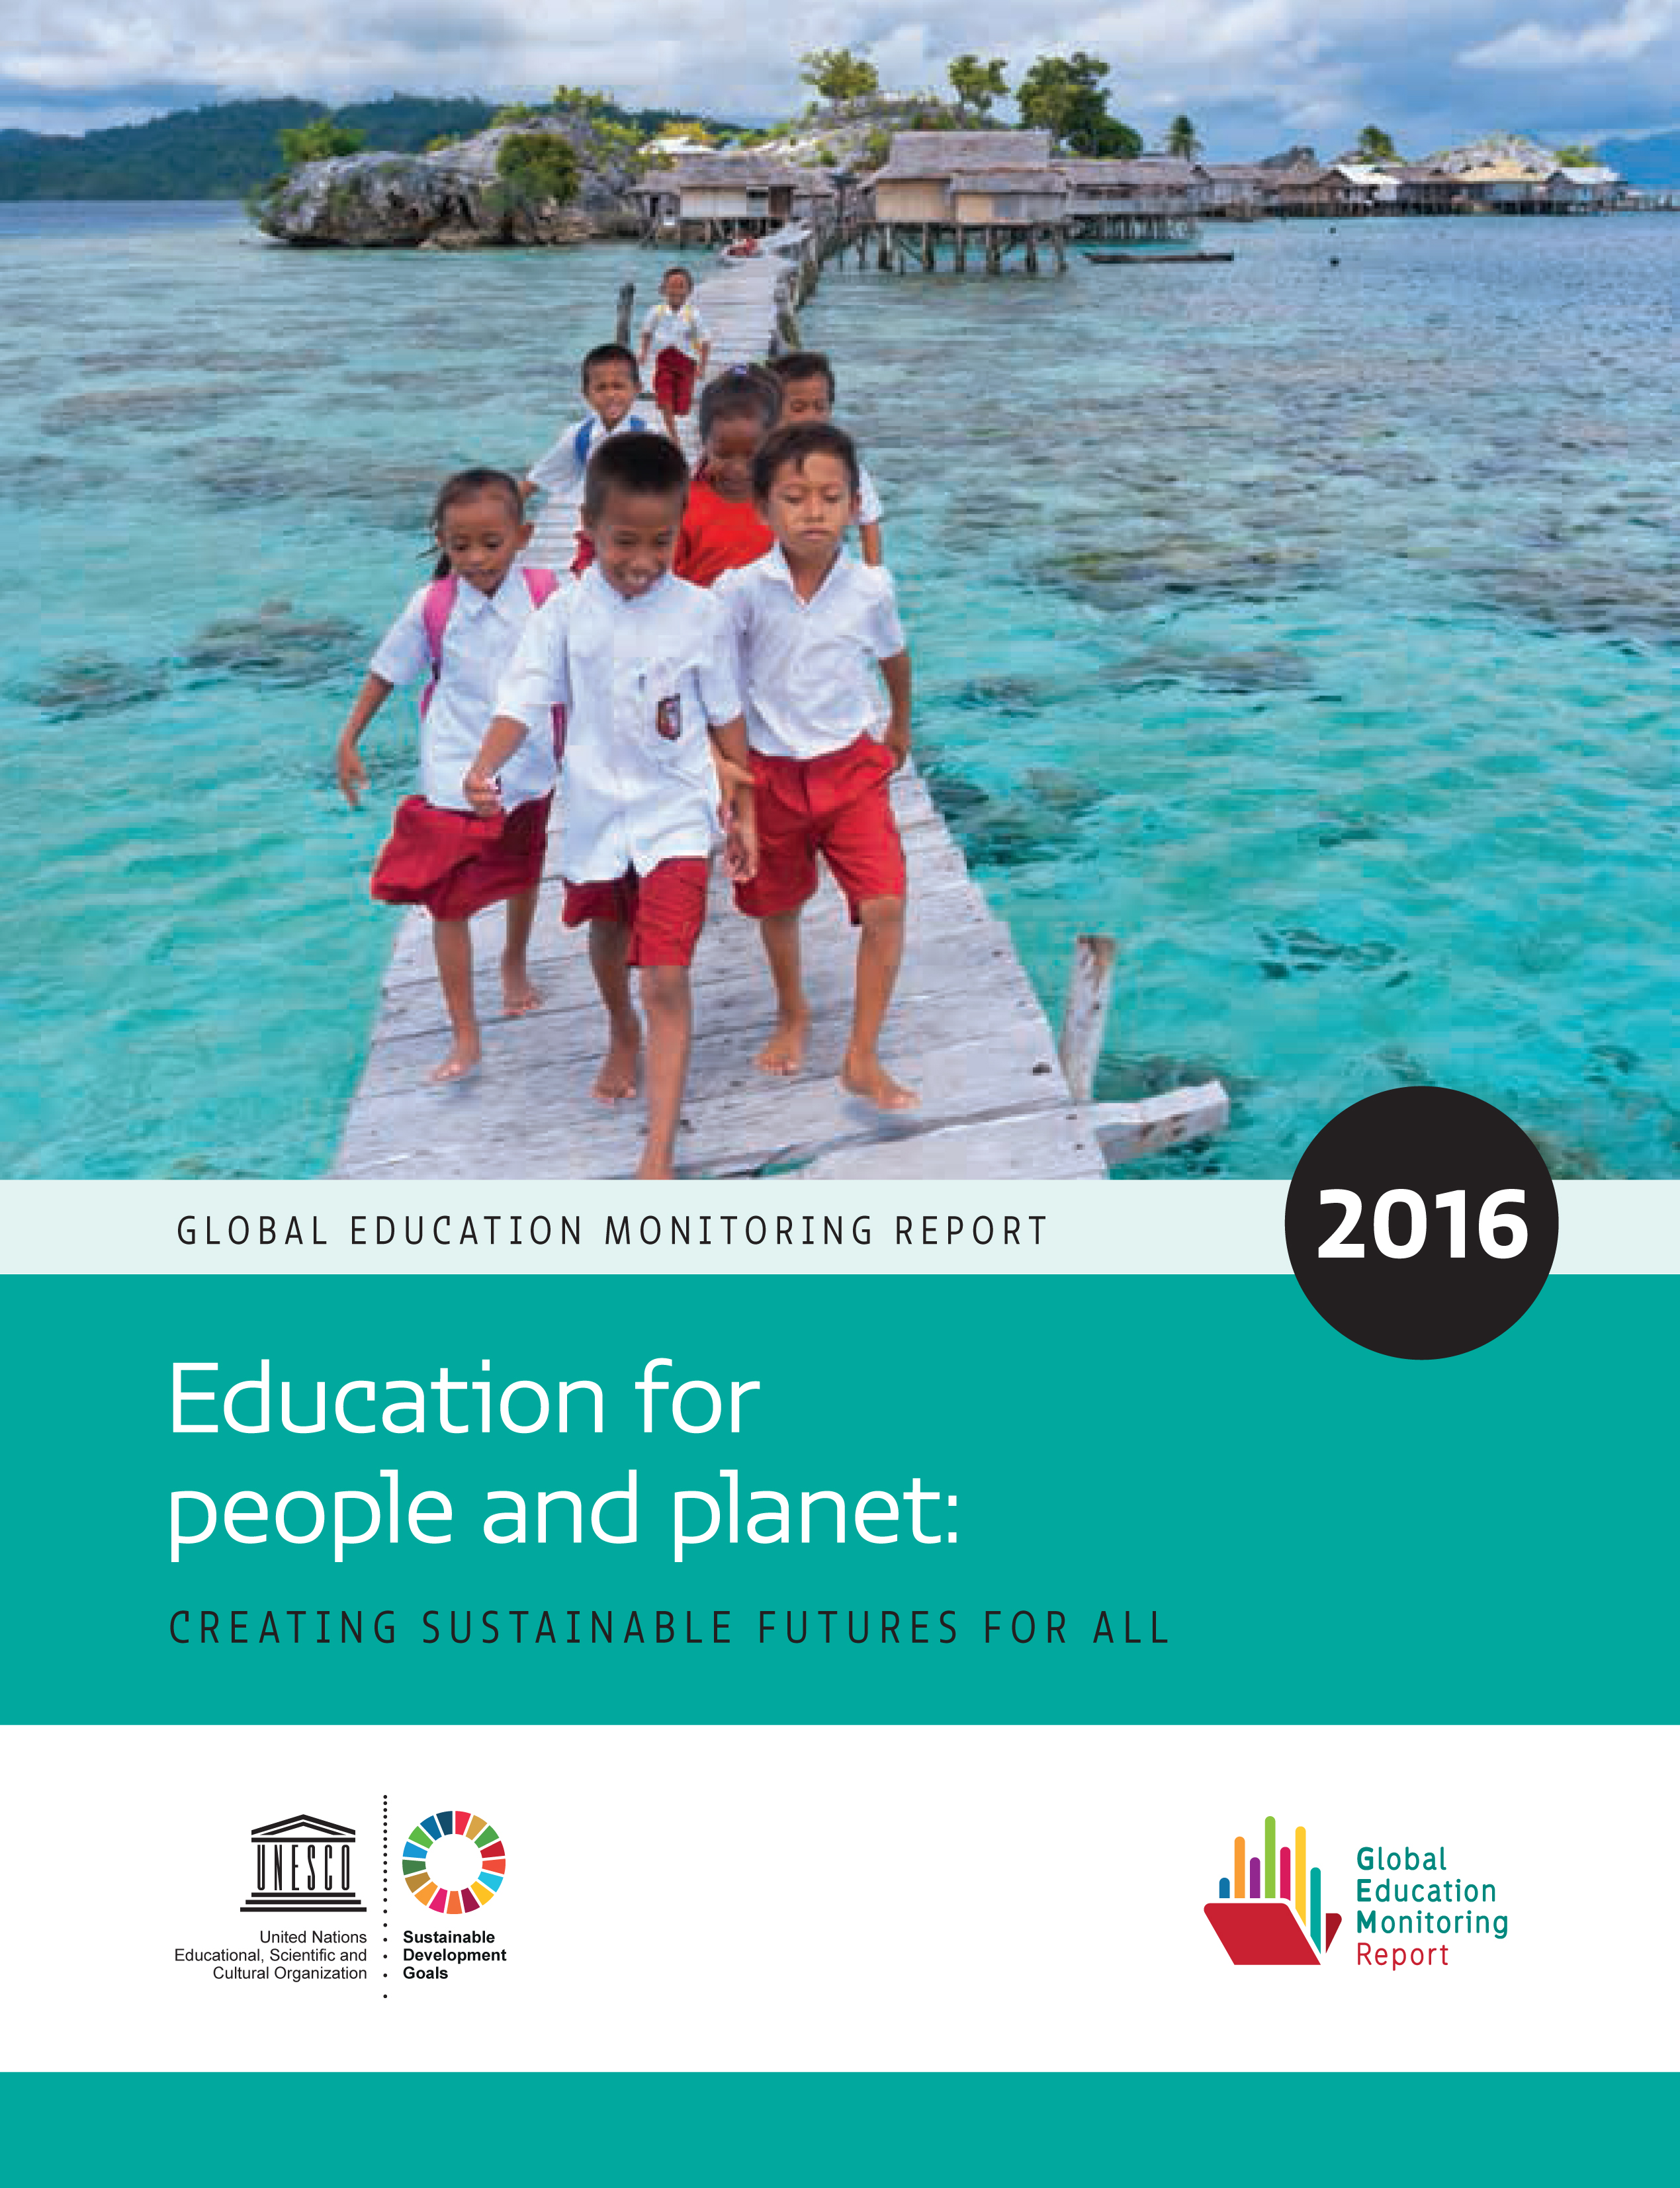 image of Global Education Monitoring Report 2016